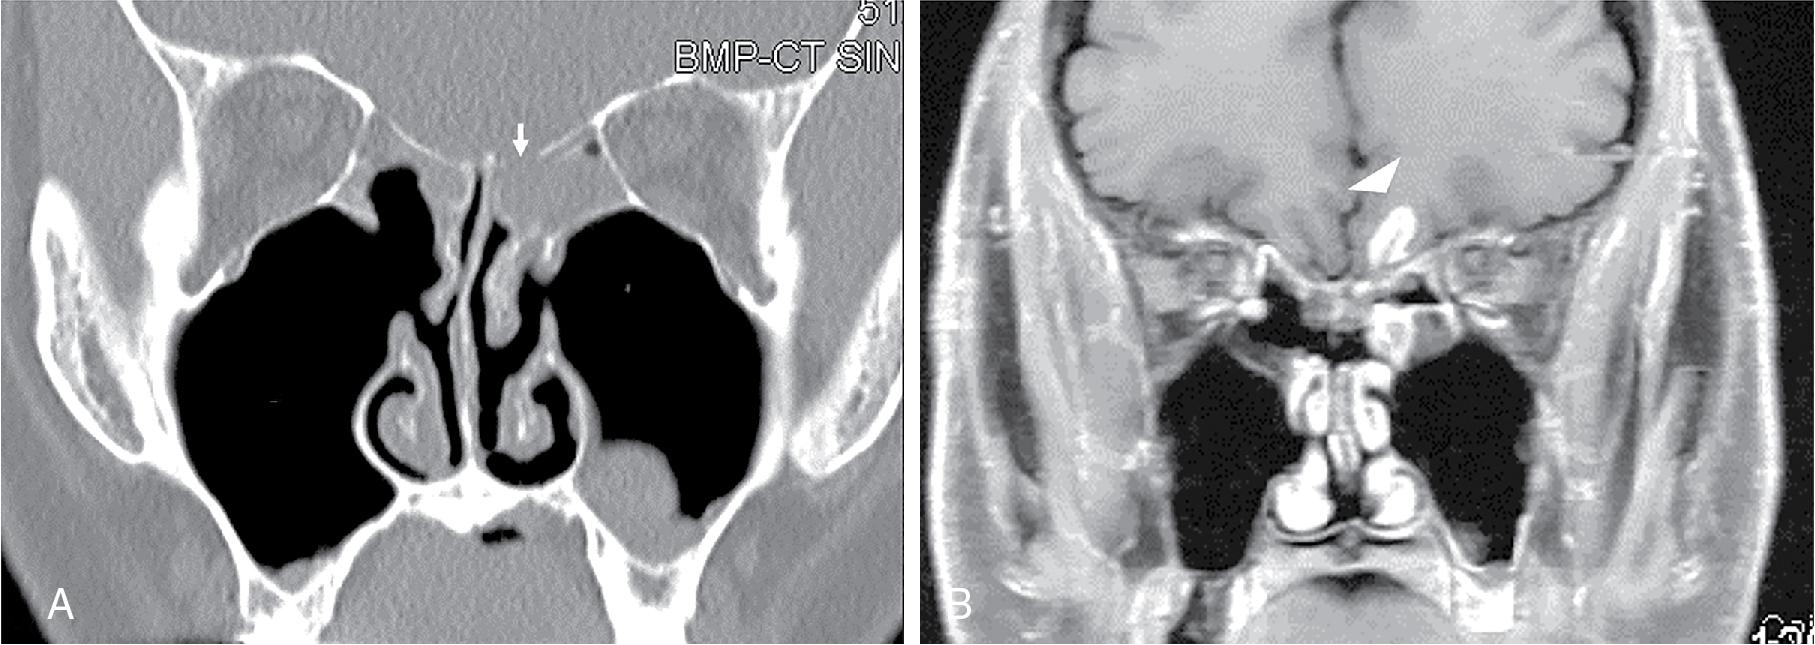 Fig. 12.1, Coronal sinus computed tomography ( A ) and T1-weighted postcontrast magnetic resonance imaging ( B ) show classic ethmoid roof injury after endoscopic sinus surgery. A left ethmoid roof bony defect (arrow) can be see with associated intracranial injury (arrowhead) .